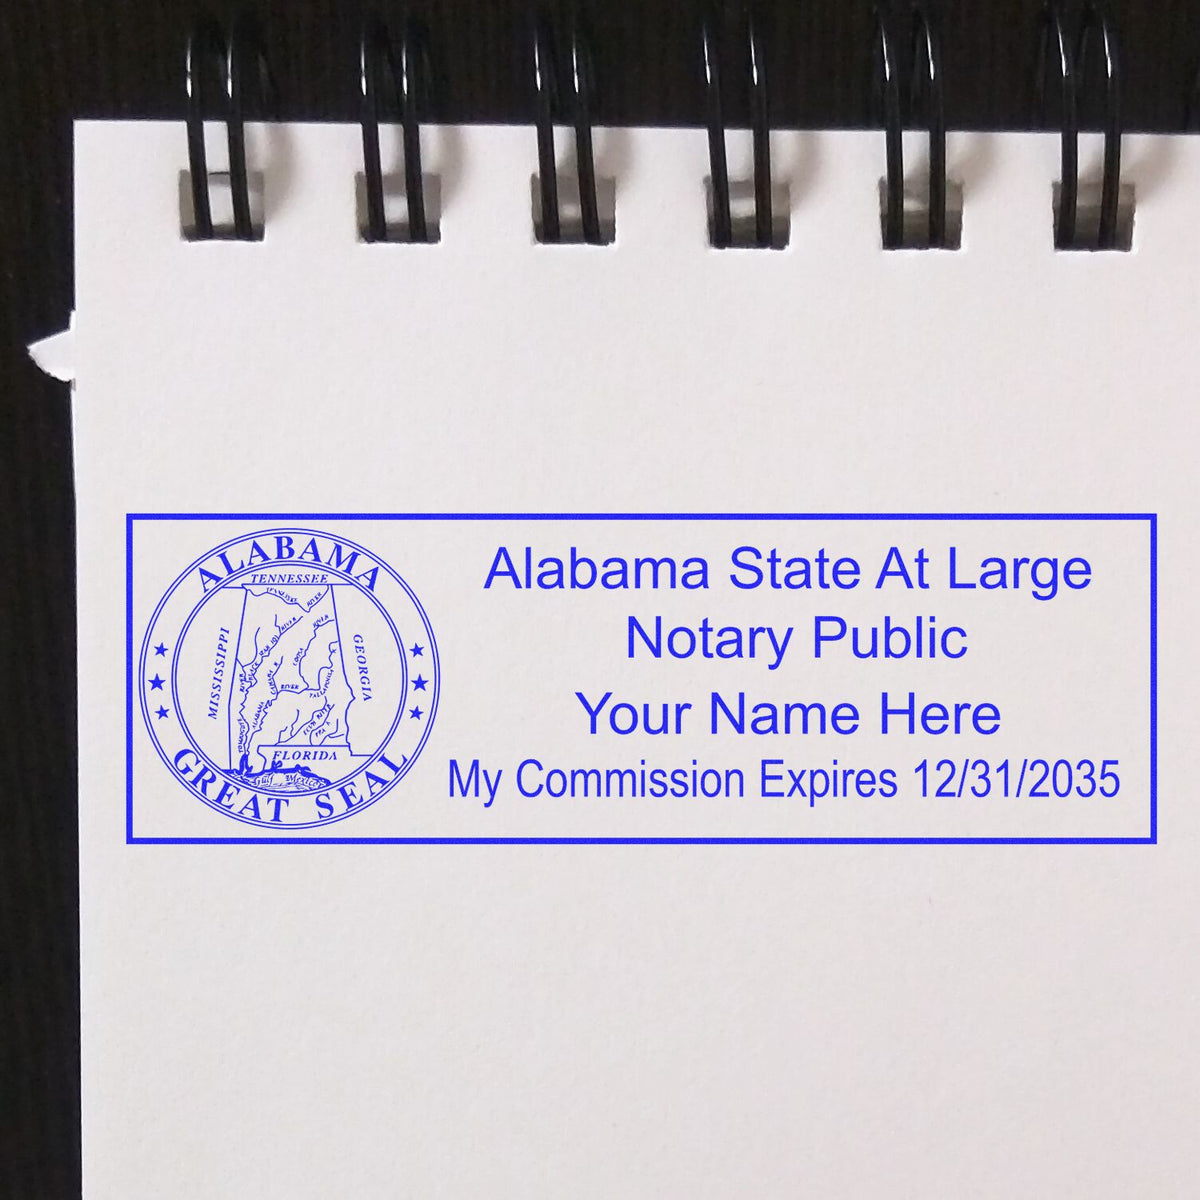 A photograph of the Heavy-Duty Alabama Rectangular Notary Stamp stamp impression reveals a vivid, professional image of the on paper.